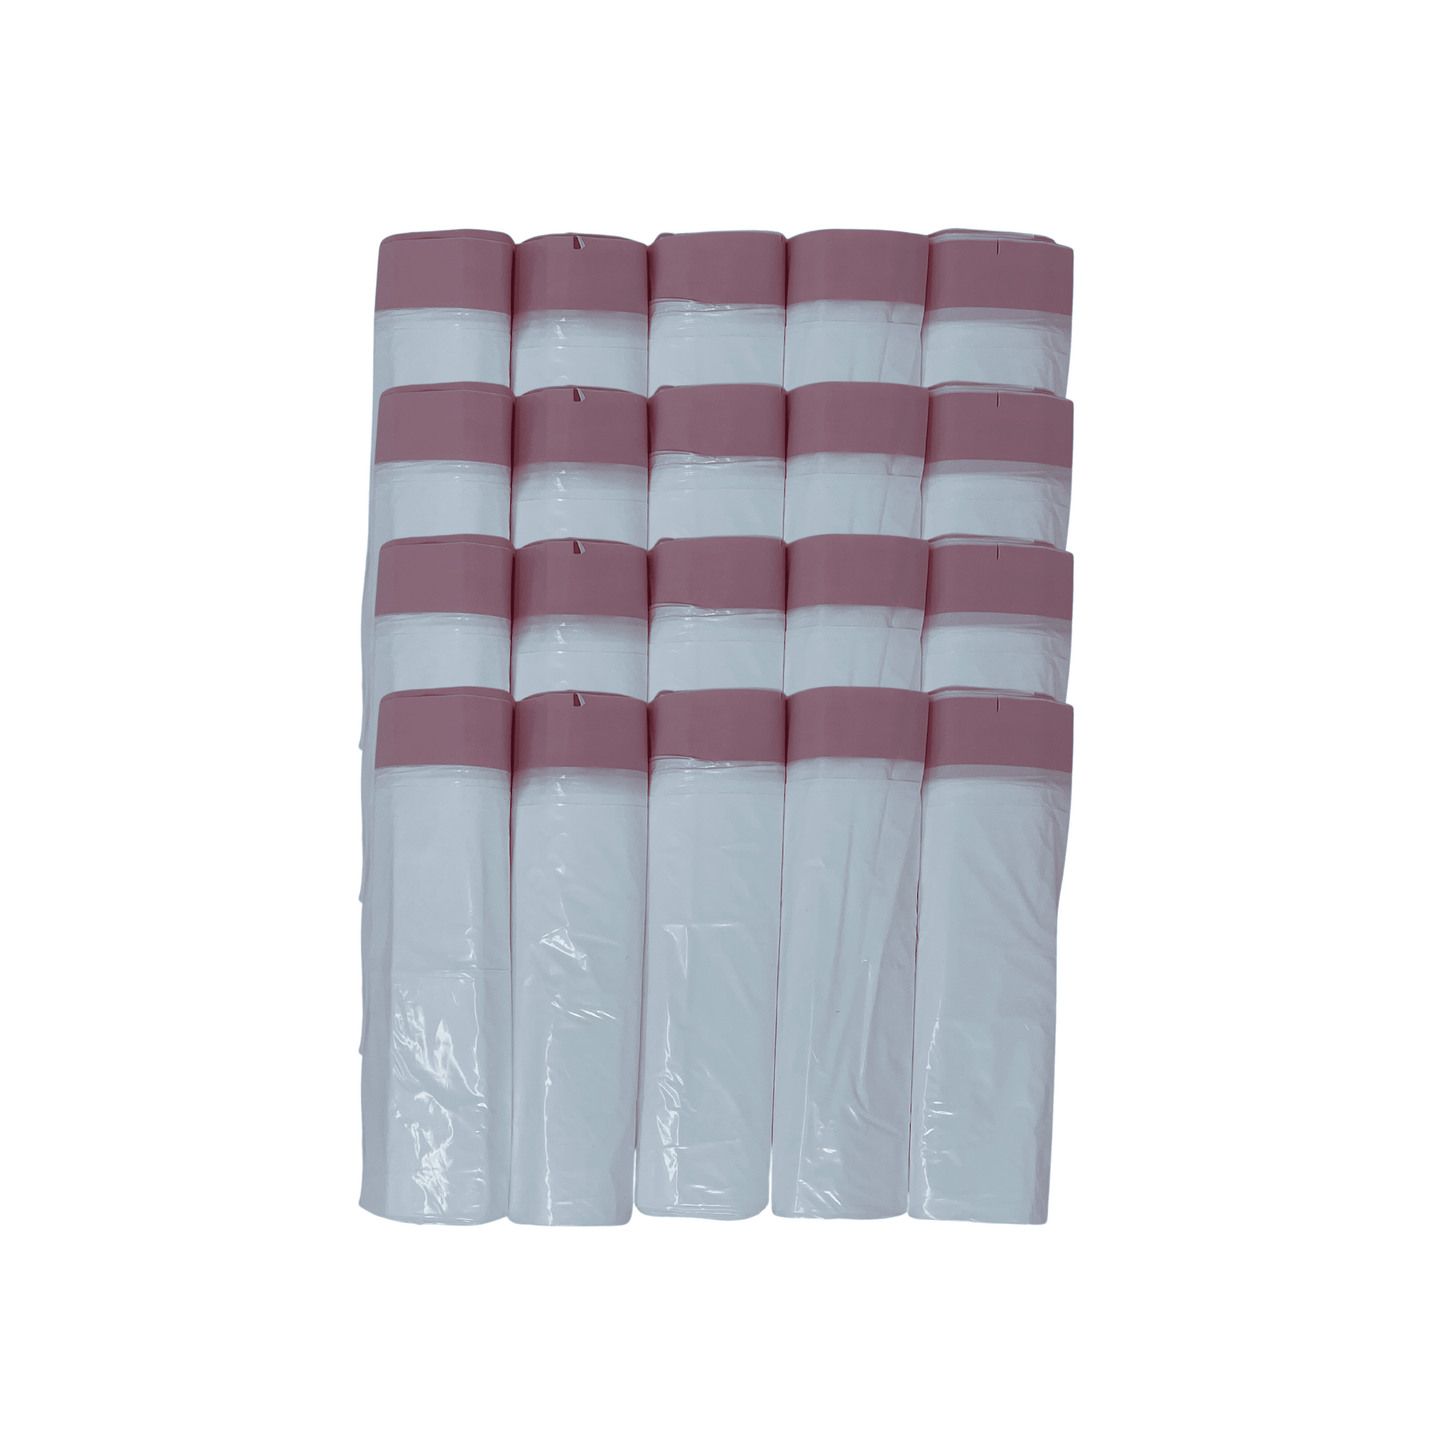 EJY IMPORT 13 Gallon White Garbage Bags